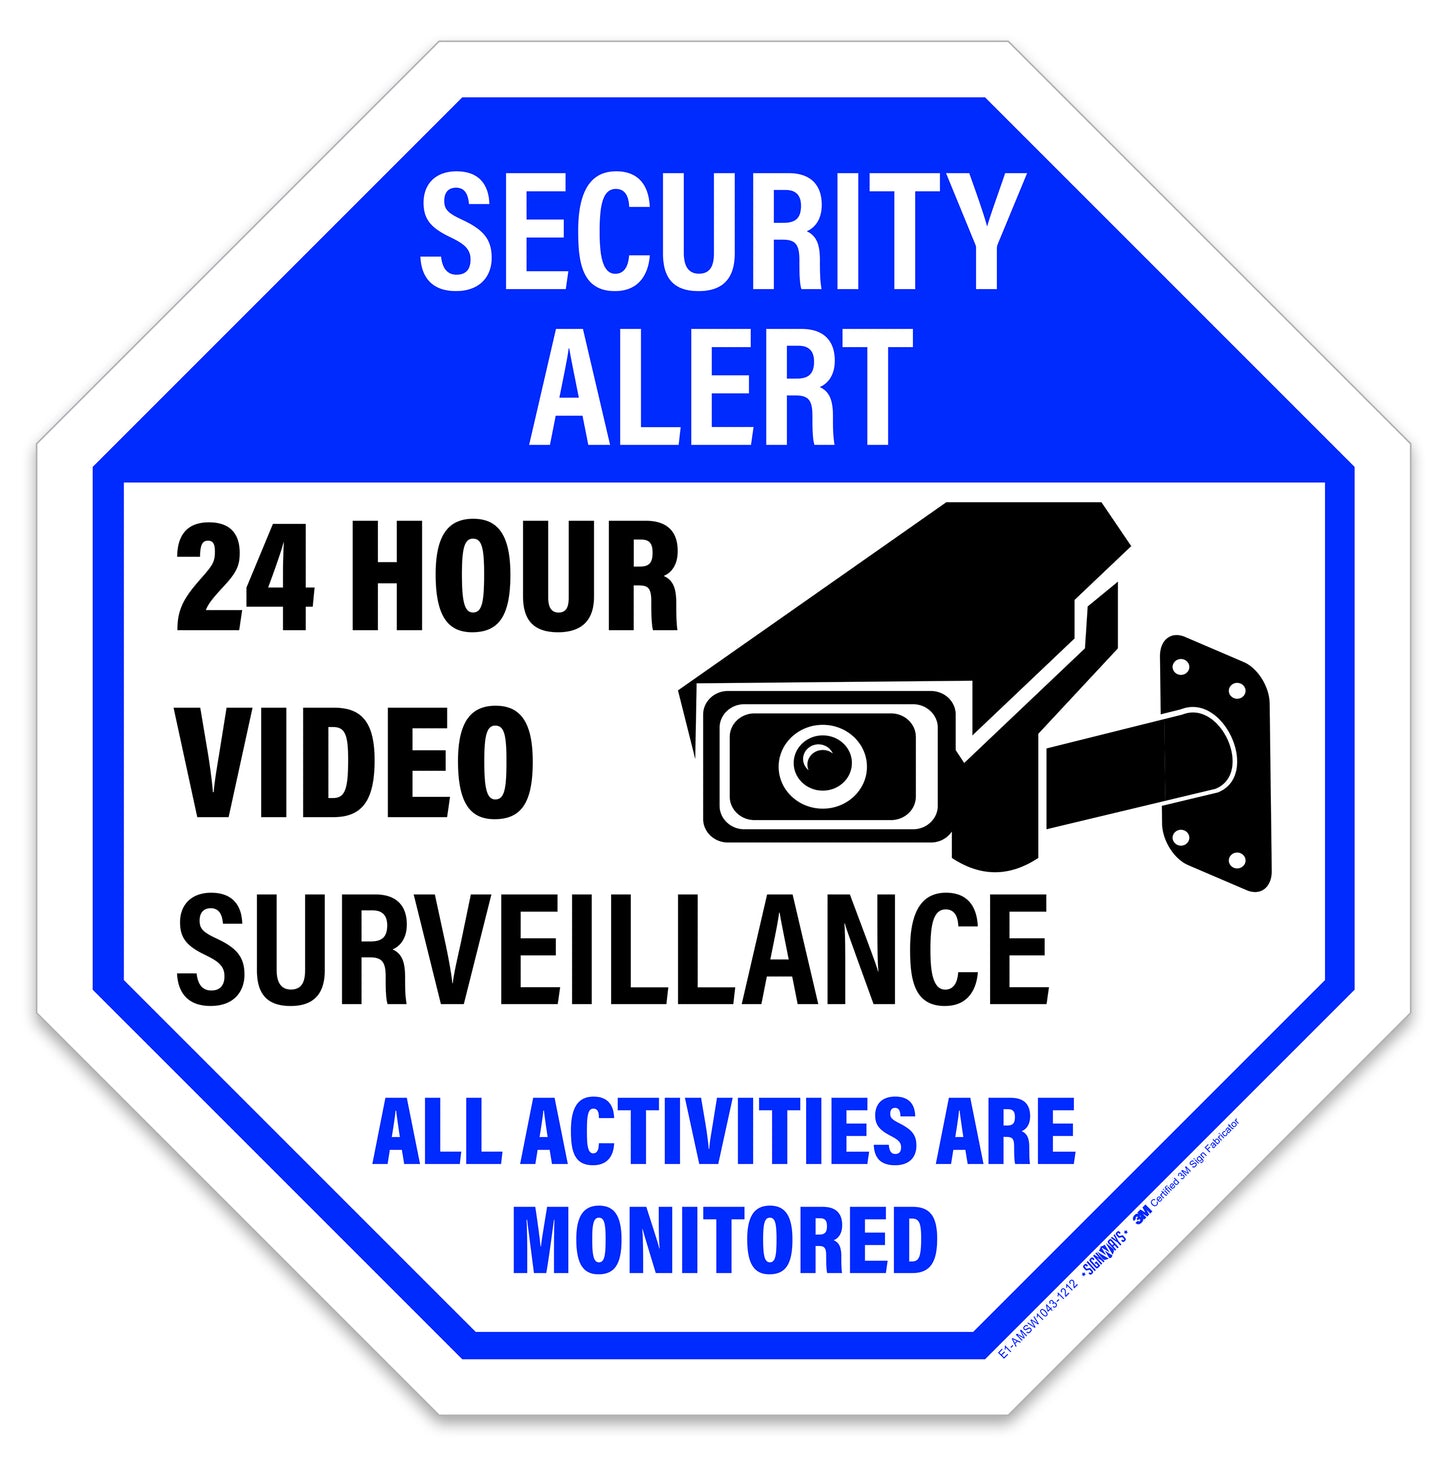 Security Alert 24 hour video surveillance all activities are monitored sign